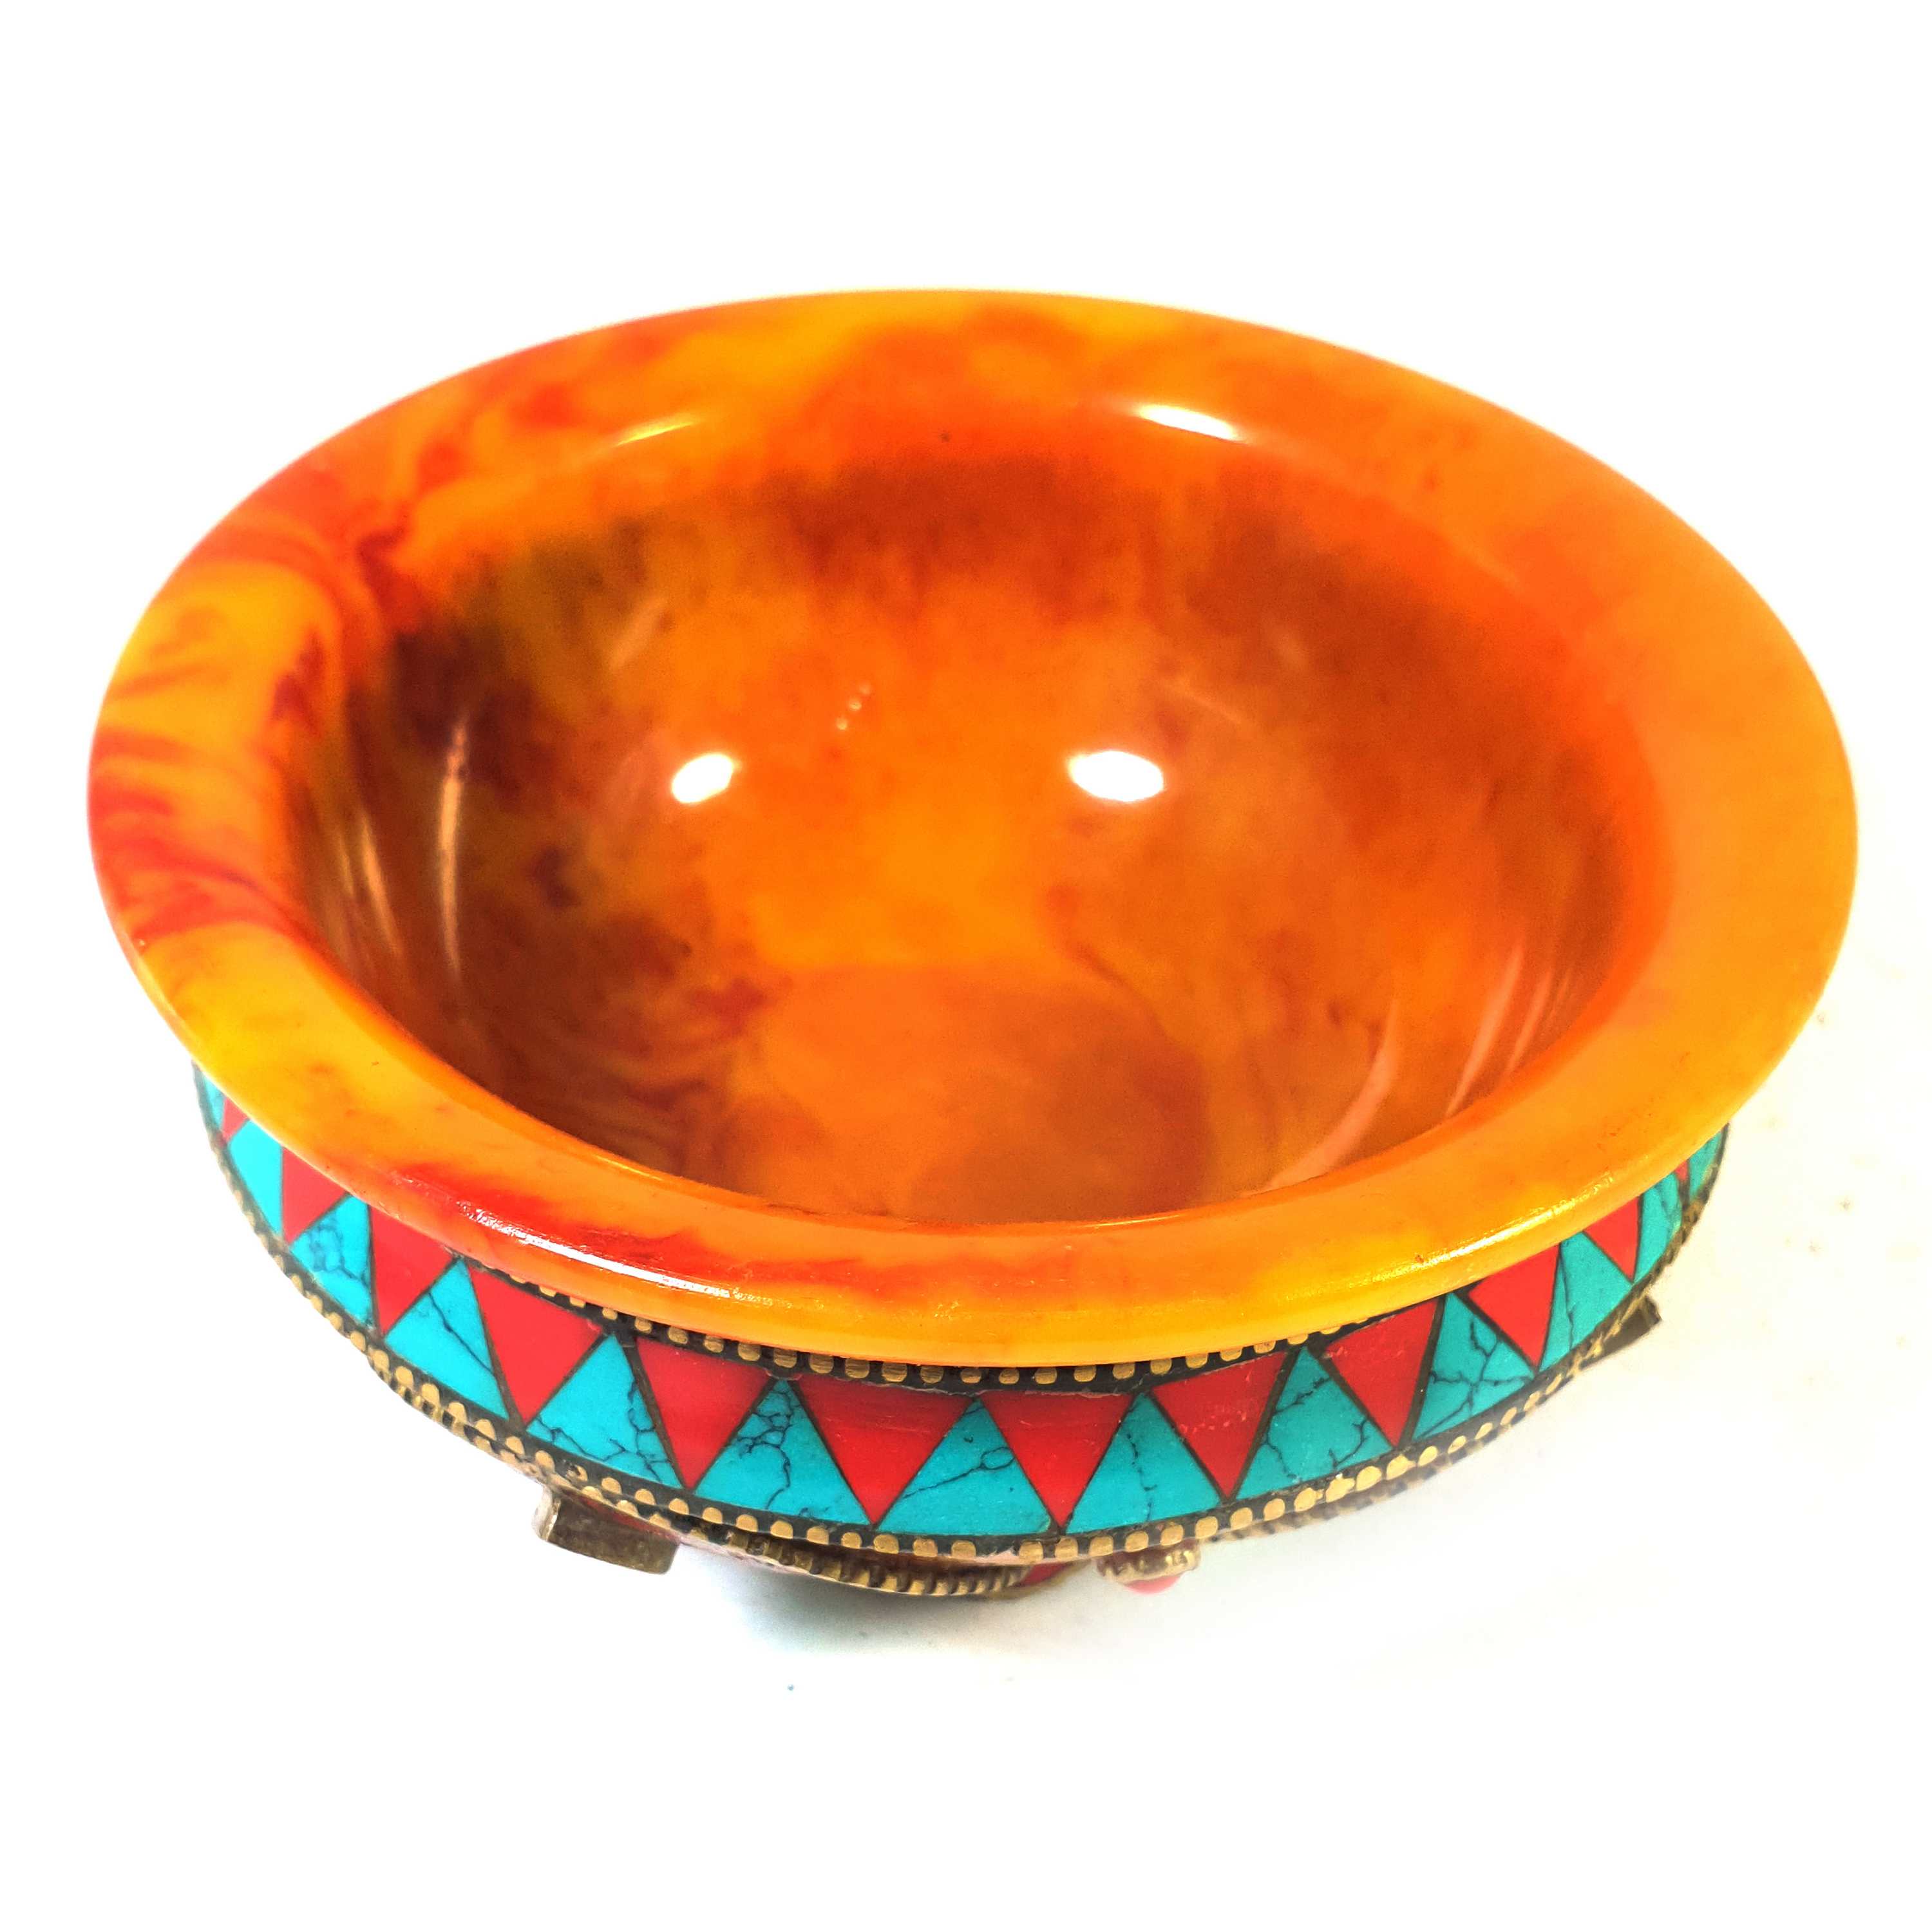 Imitation Amber Offering Bowl With stone And metal Setting